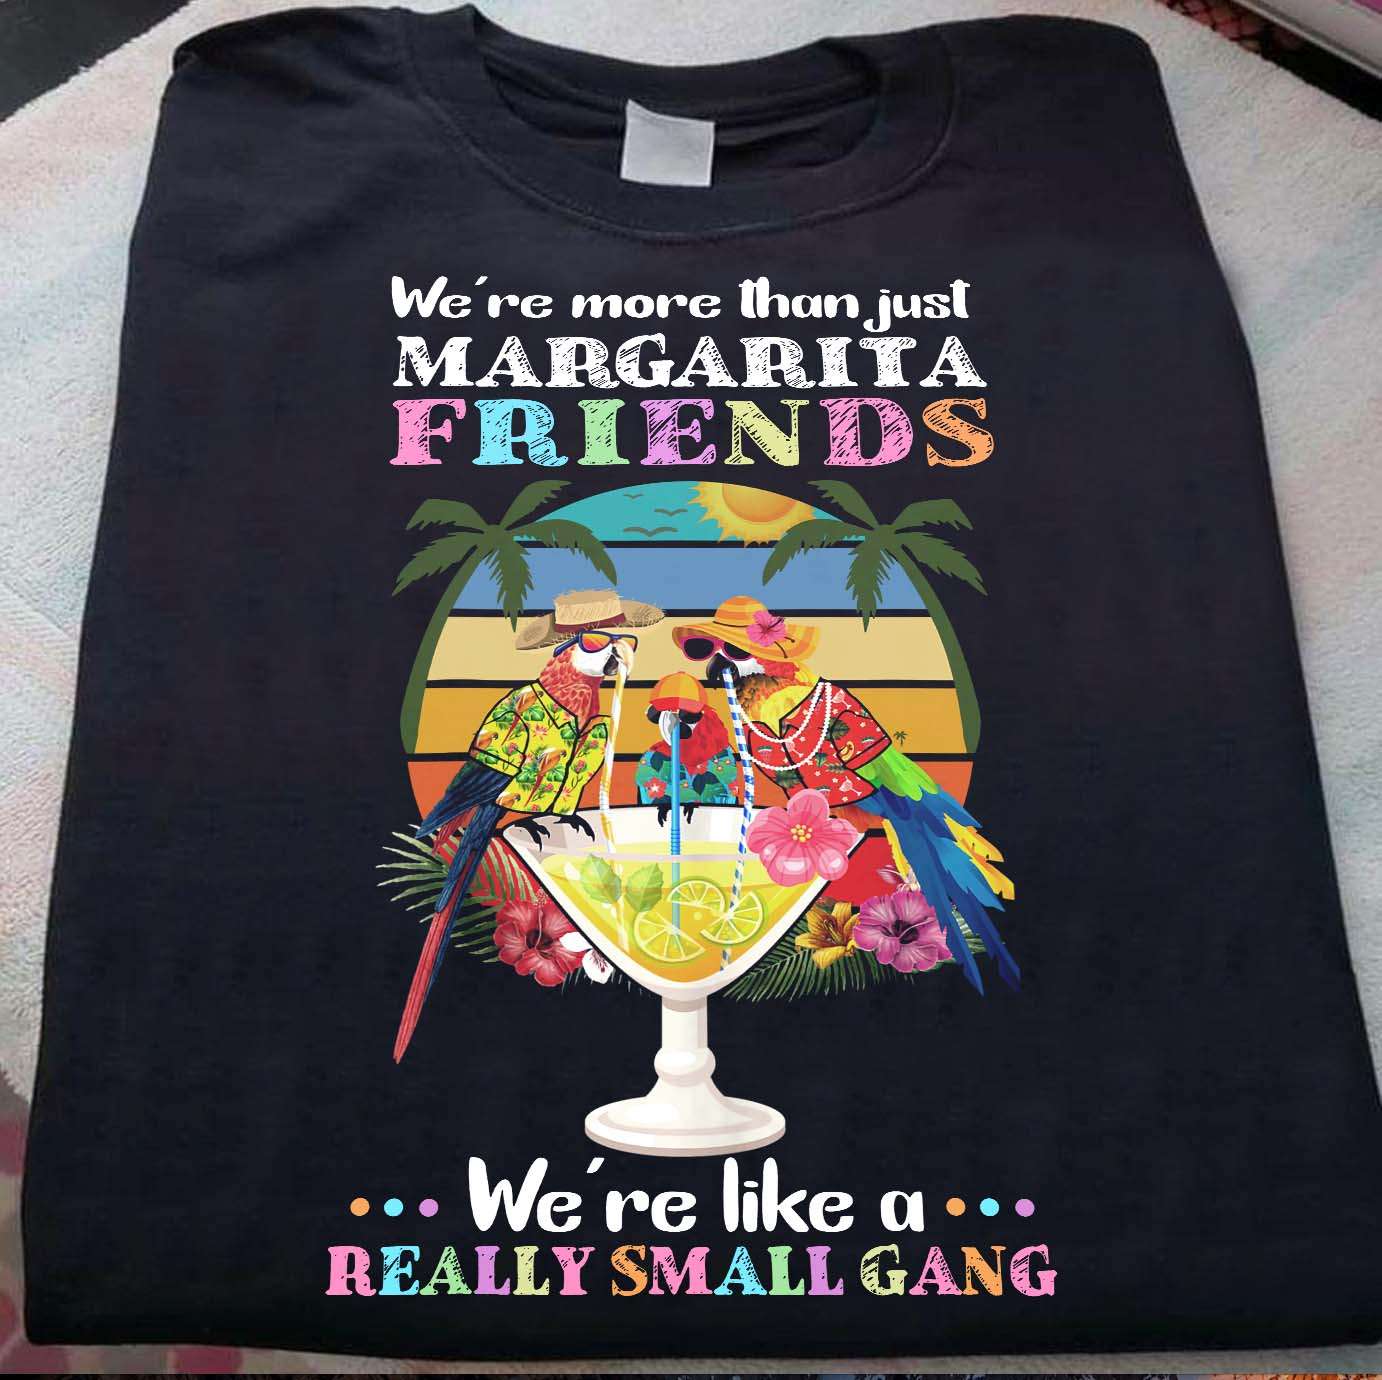 We're more than just Margarita friends we're like a really small gang - Margarita cocktail